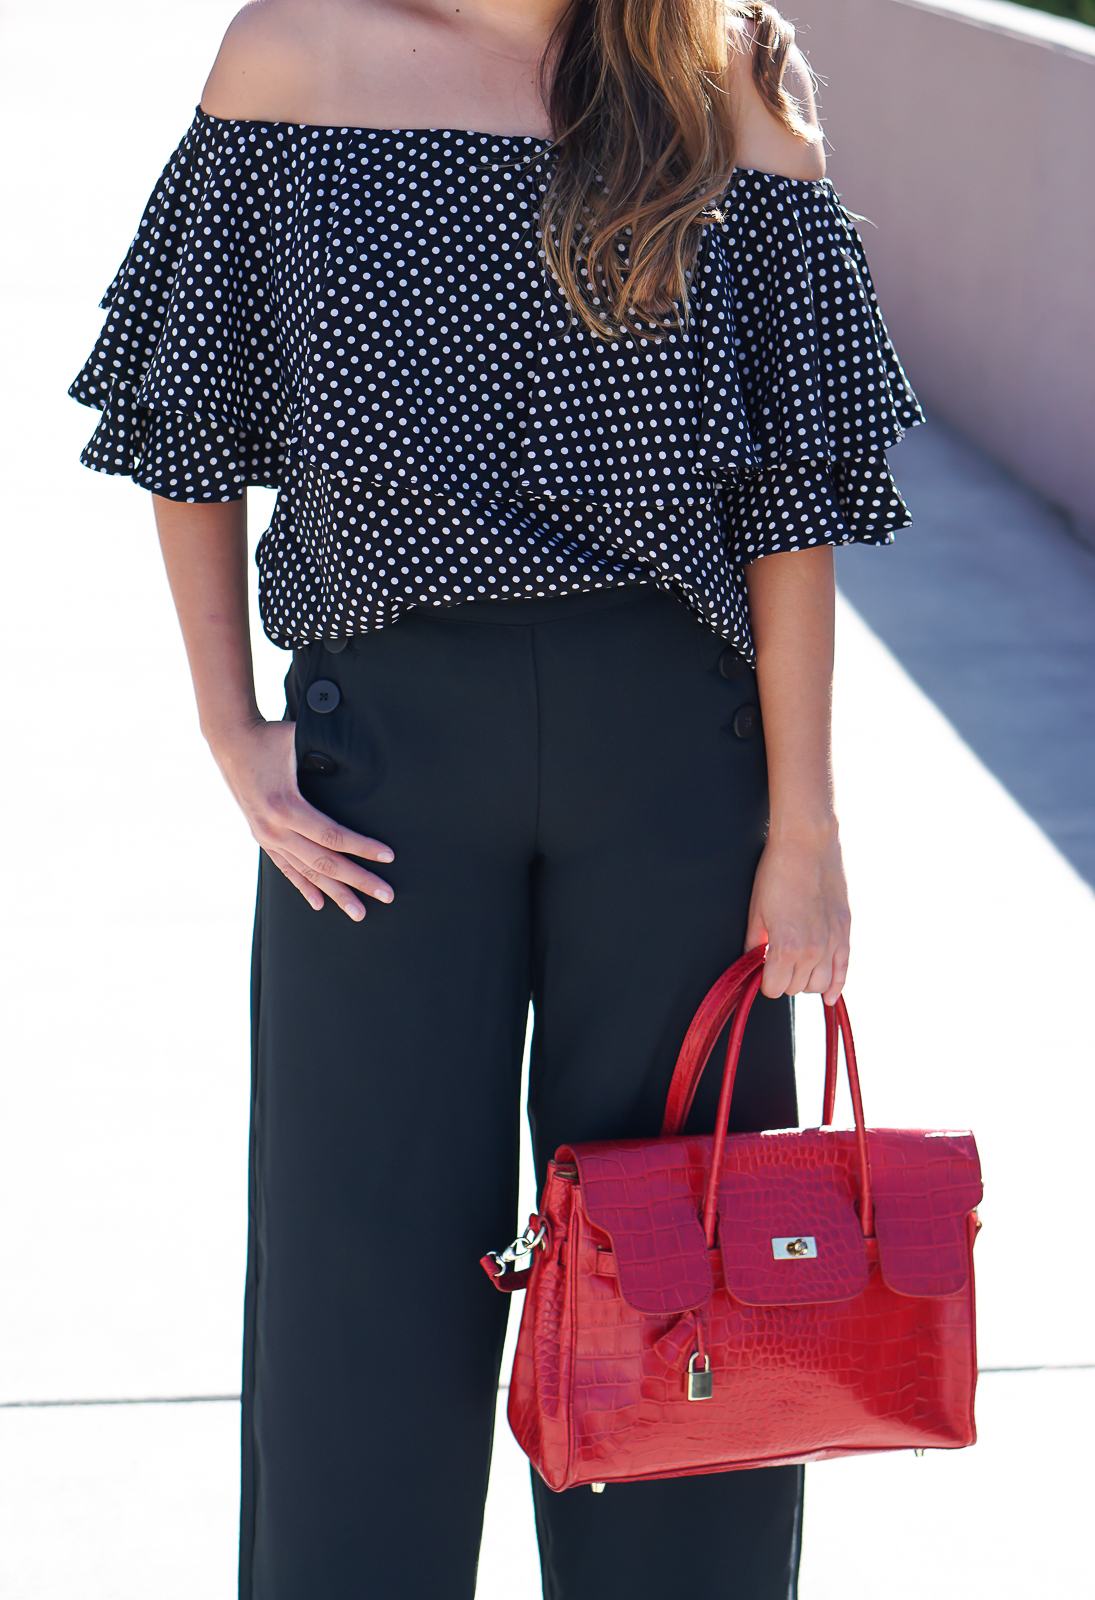 Fashion, SheIn Black Polka Dot Ruffle Off The Shoulder Blouse, How to wear off the shoulder tops, Women's Sailor Pant - Who What Wear x Target, Red top handle crocodile bag, Shoemint Heels, Diva Mac Red Lipstick, Latina Fashion Blogger, LA Fashion Blogger, Long Beach Performing Arts Center